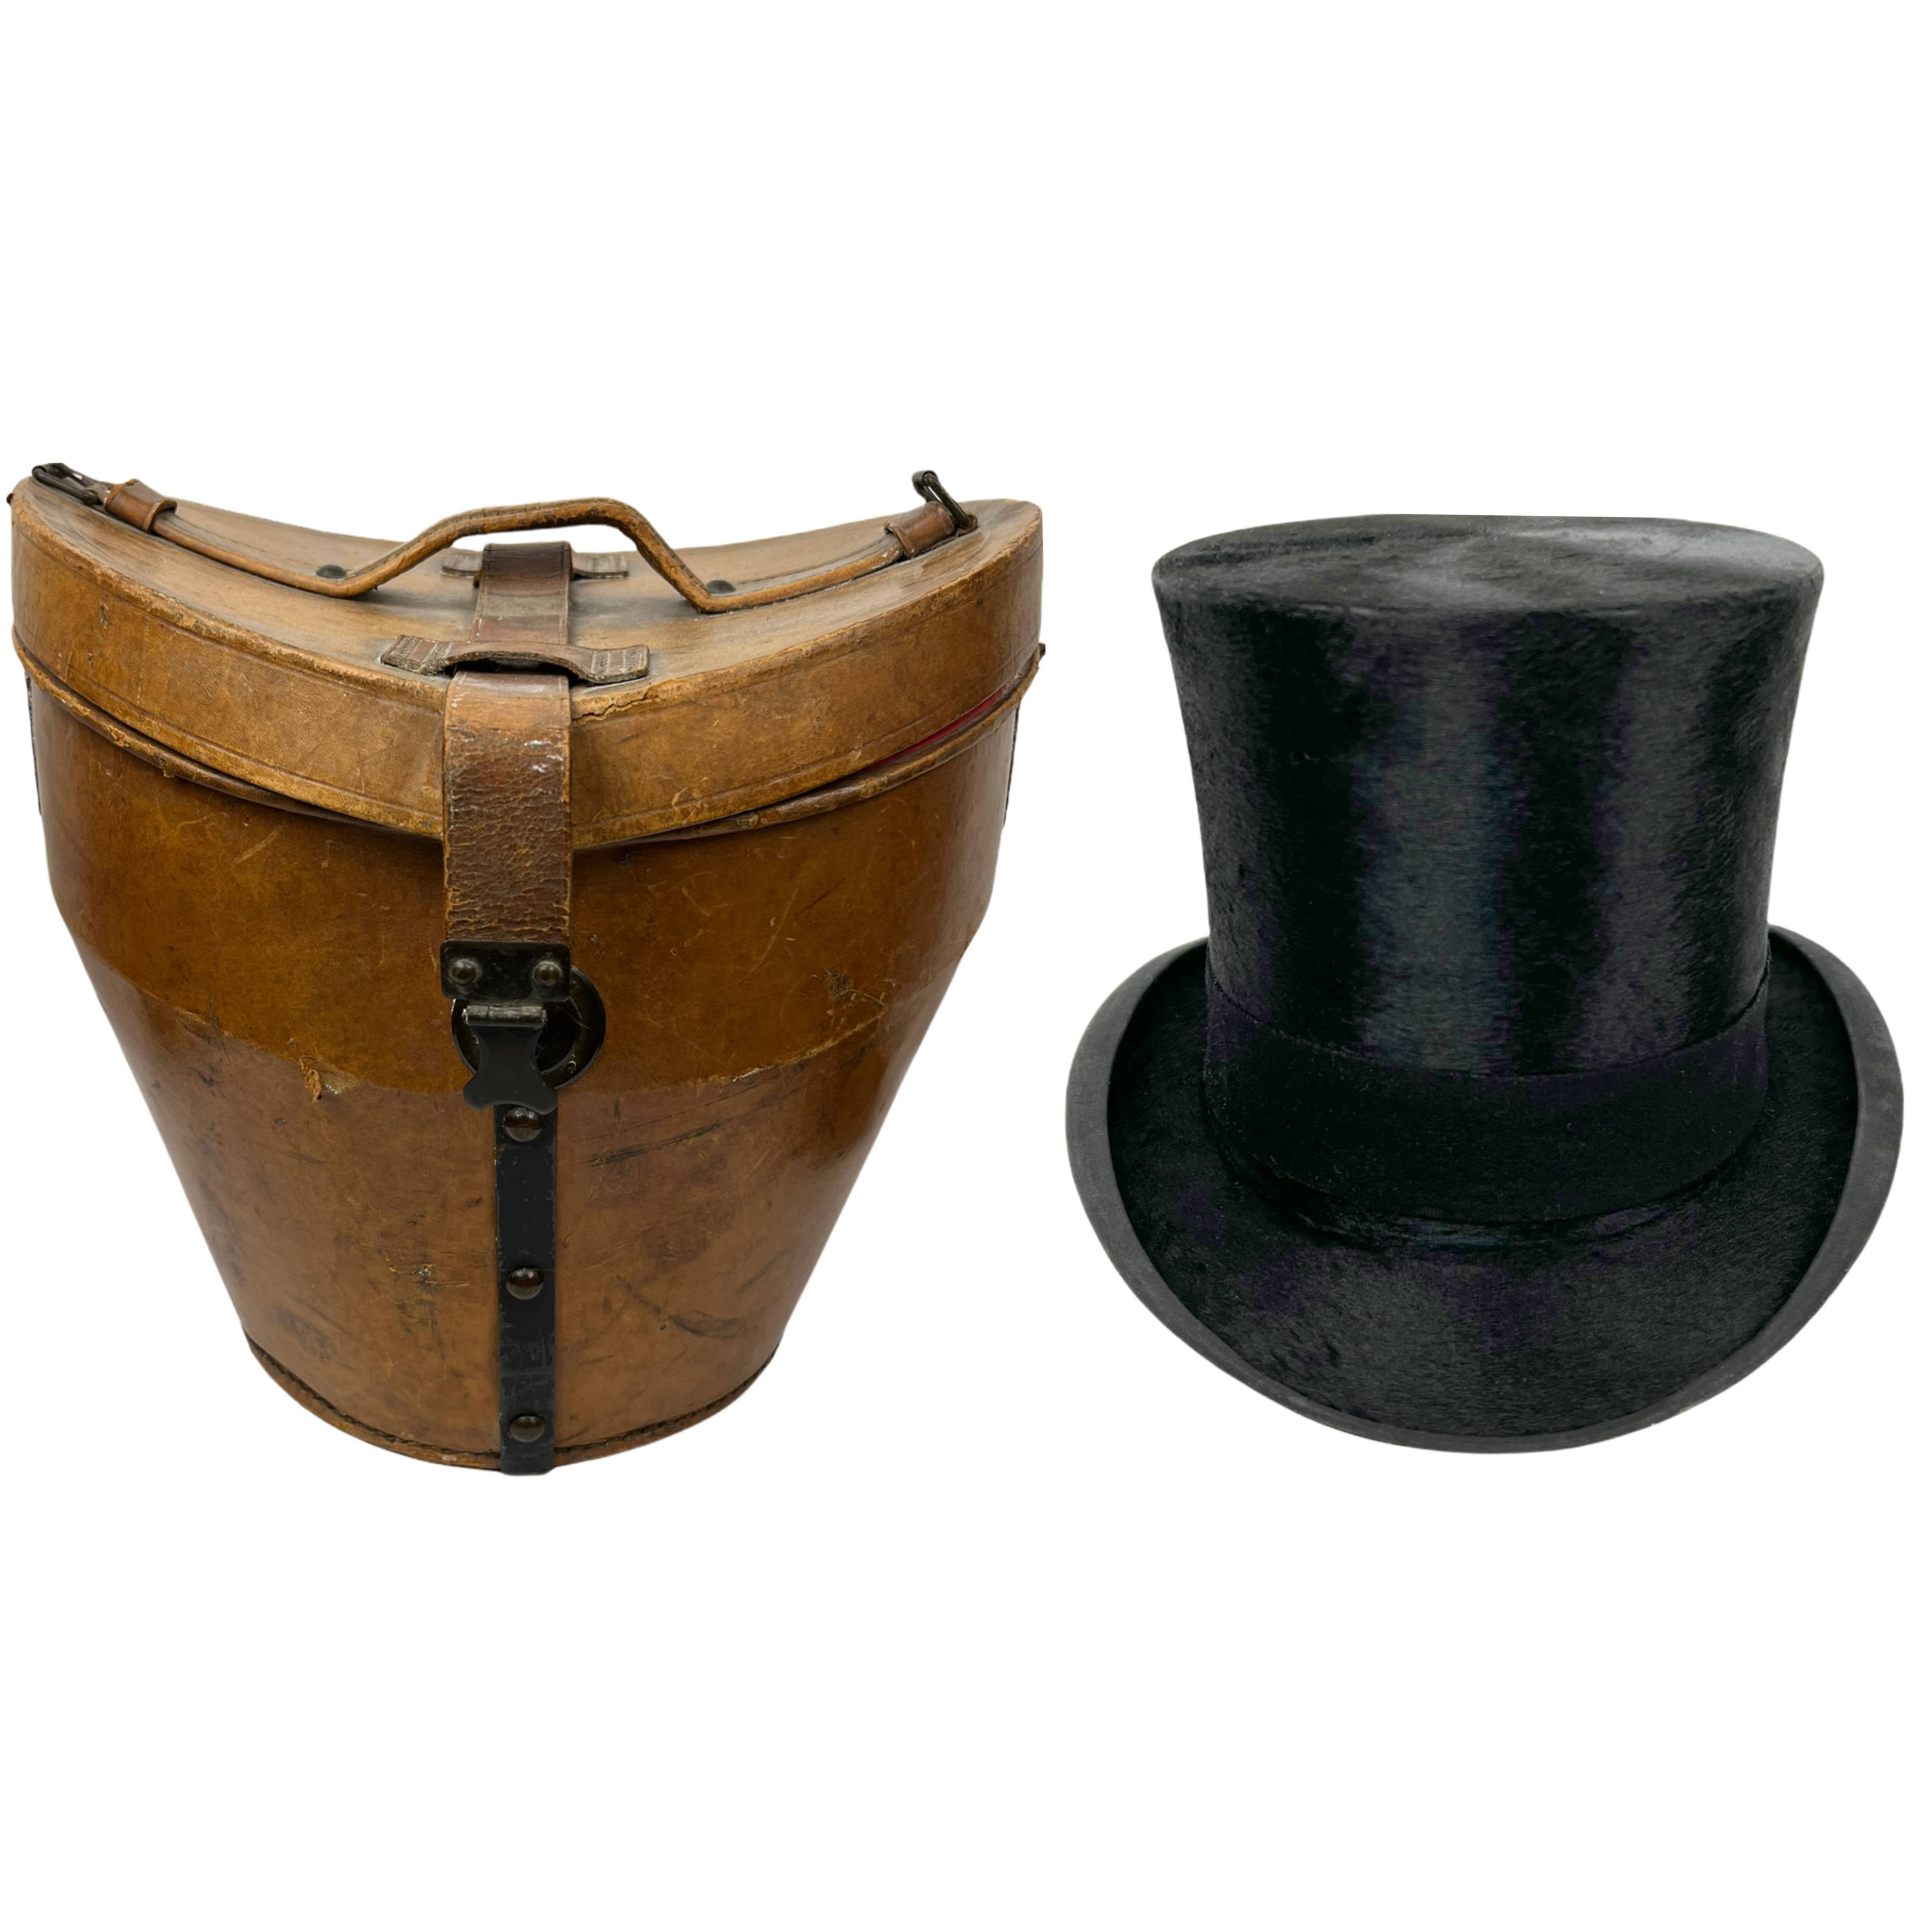 Antique Leather Top Hat Box, Luggage, French Silk Top Hat Inside. Coll –  Antiques & Uncommon Treasure